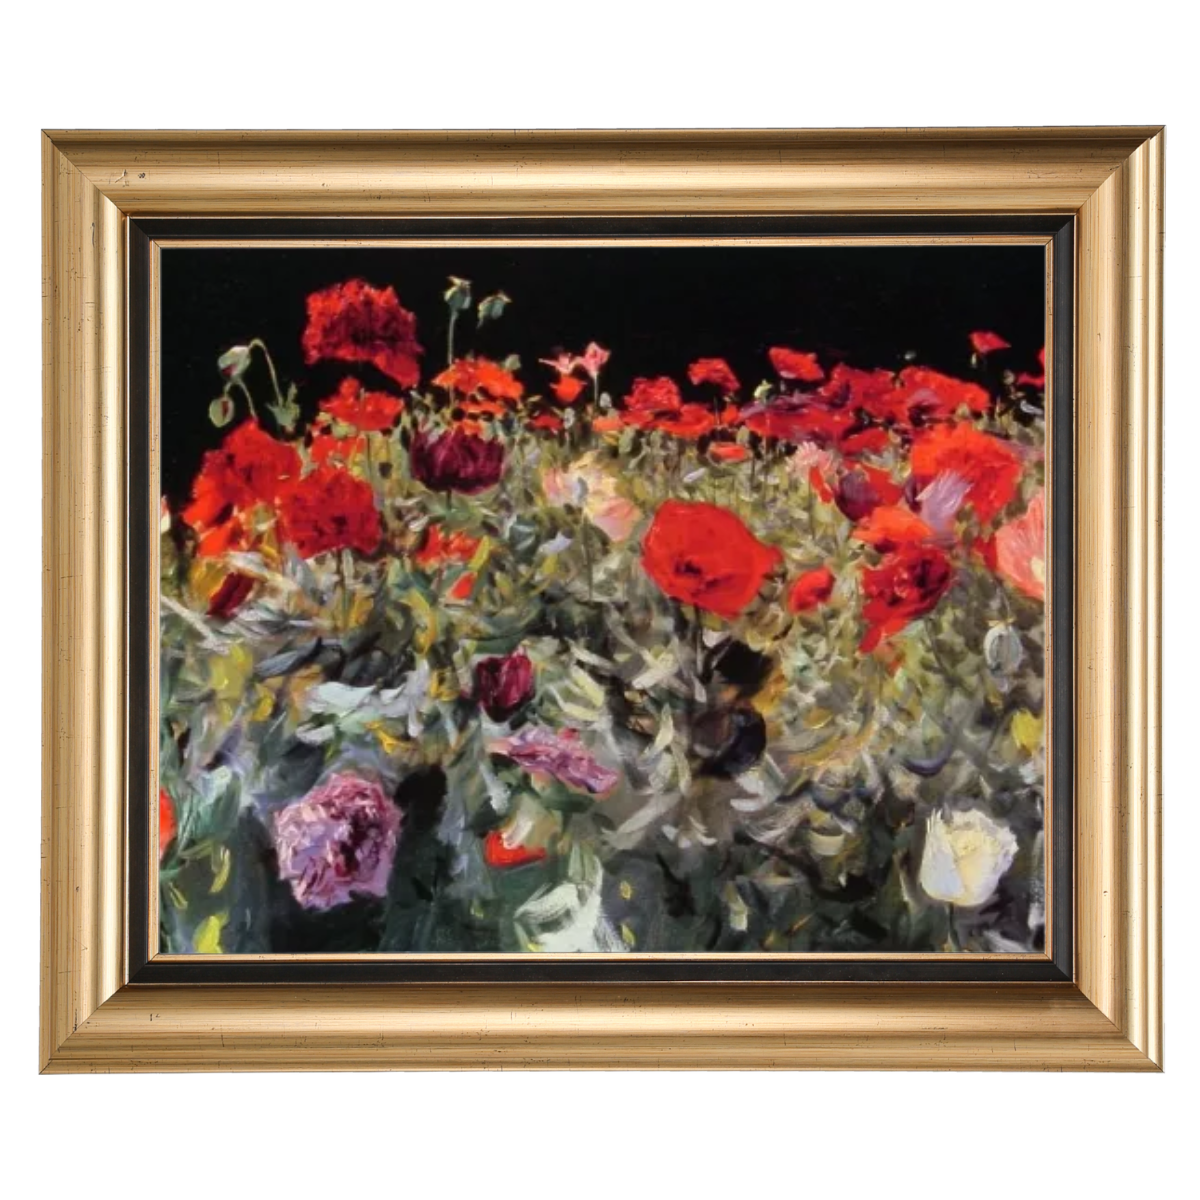 Poppies- Metal Flower Wall Art For Living Room